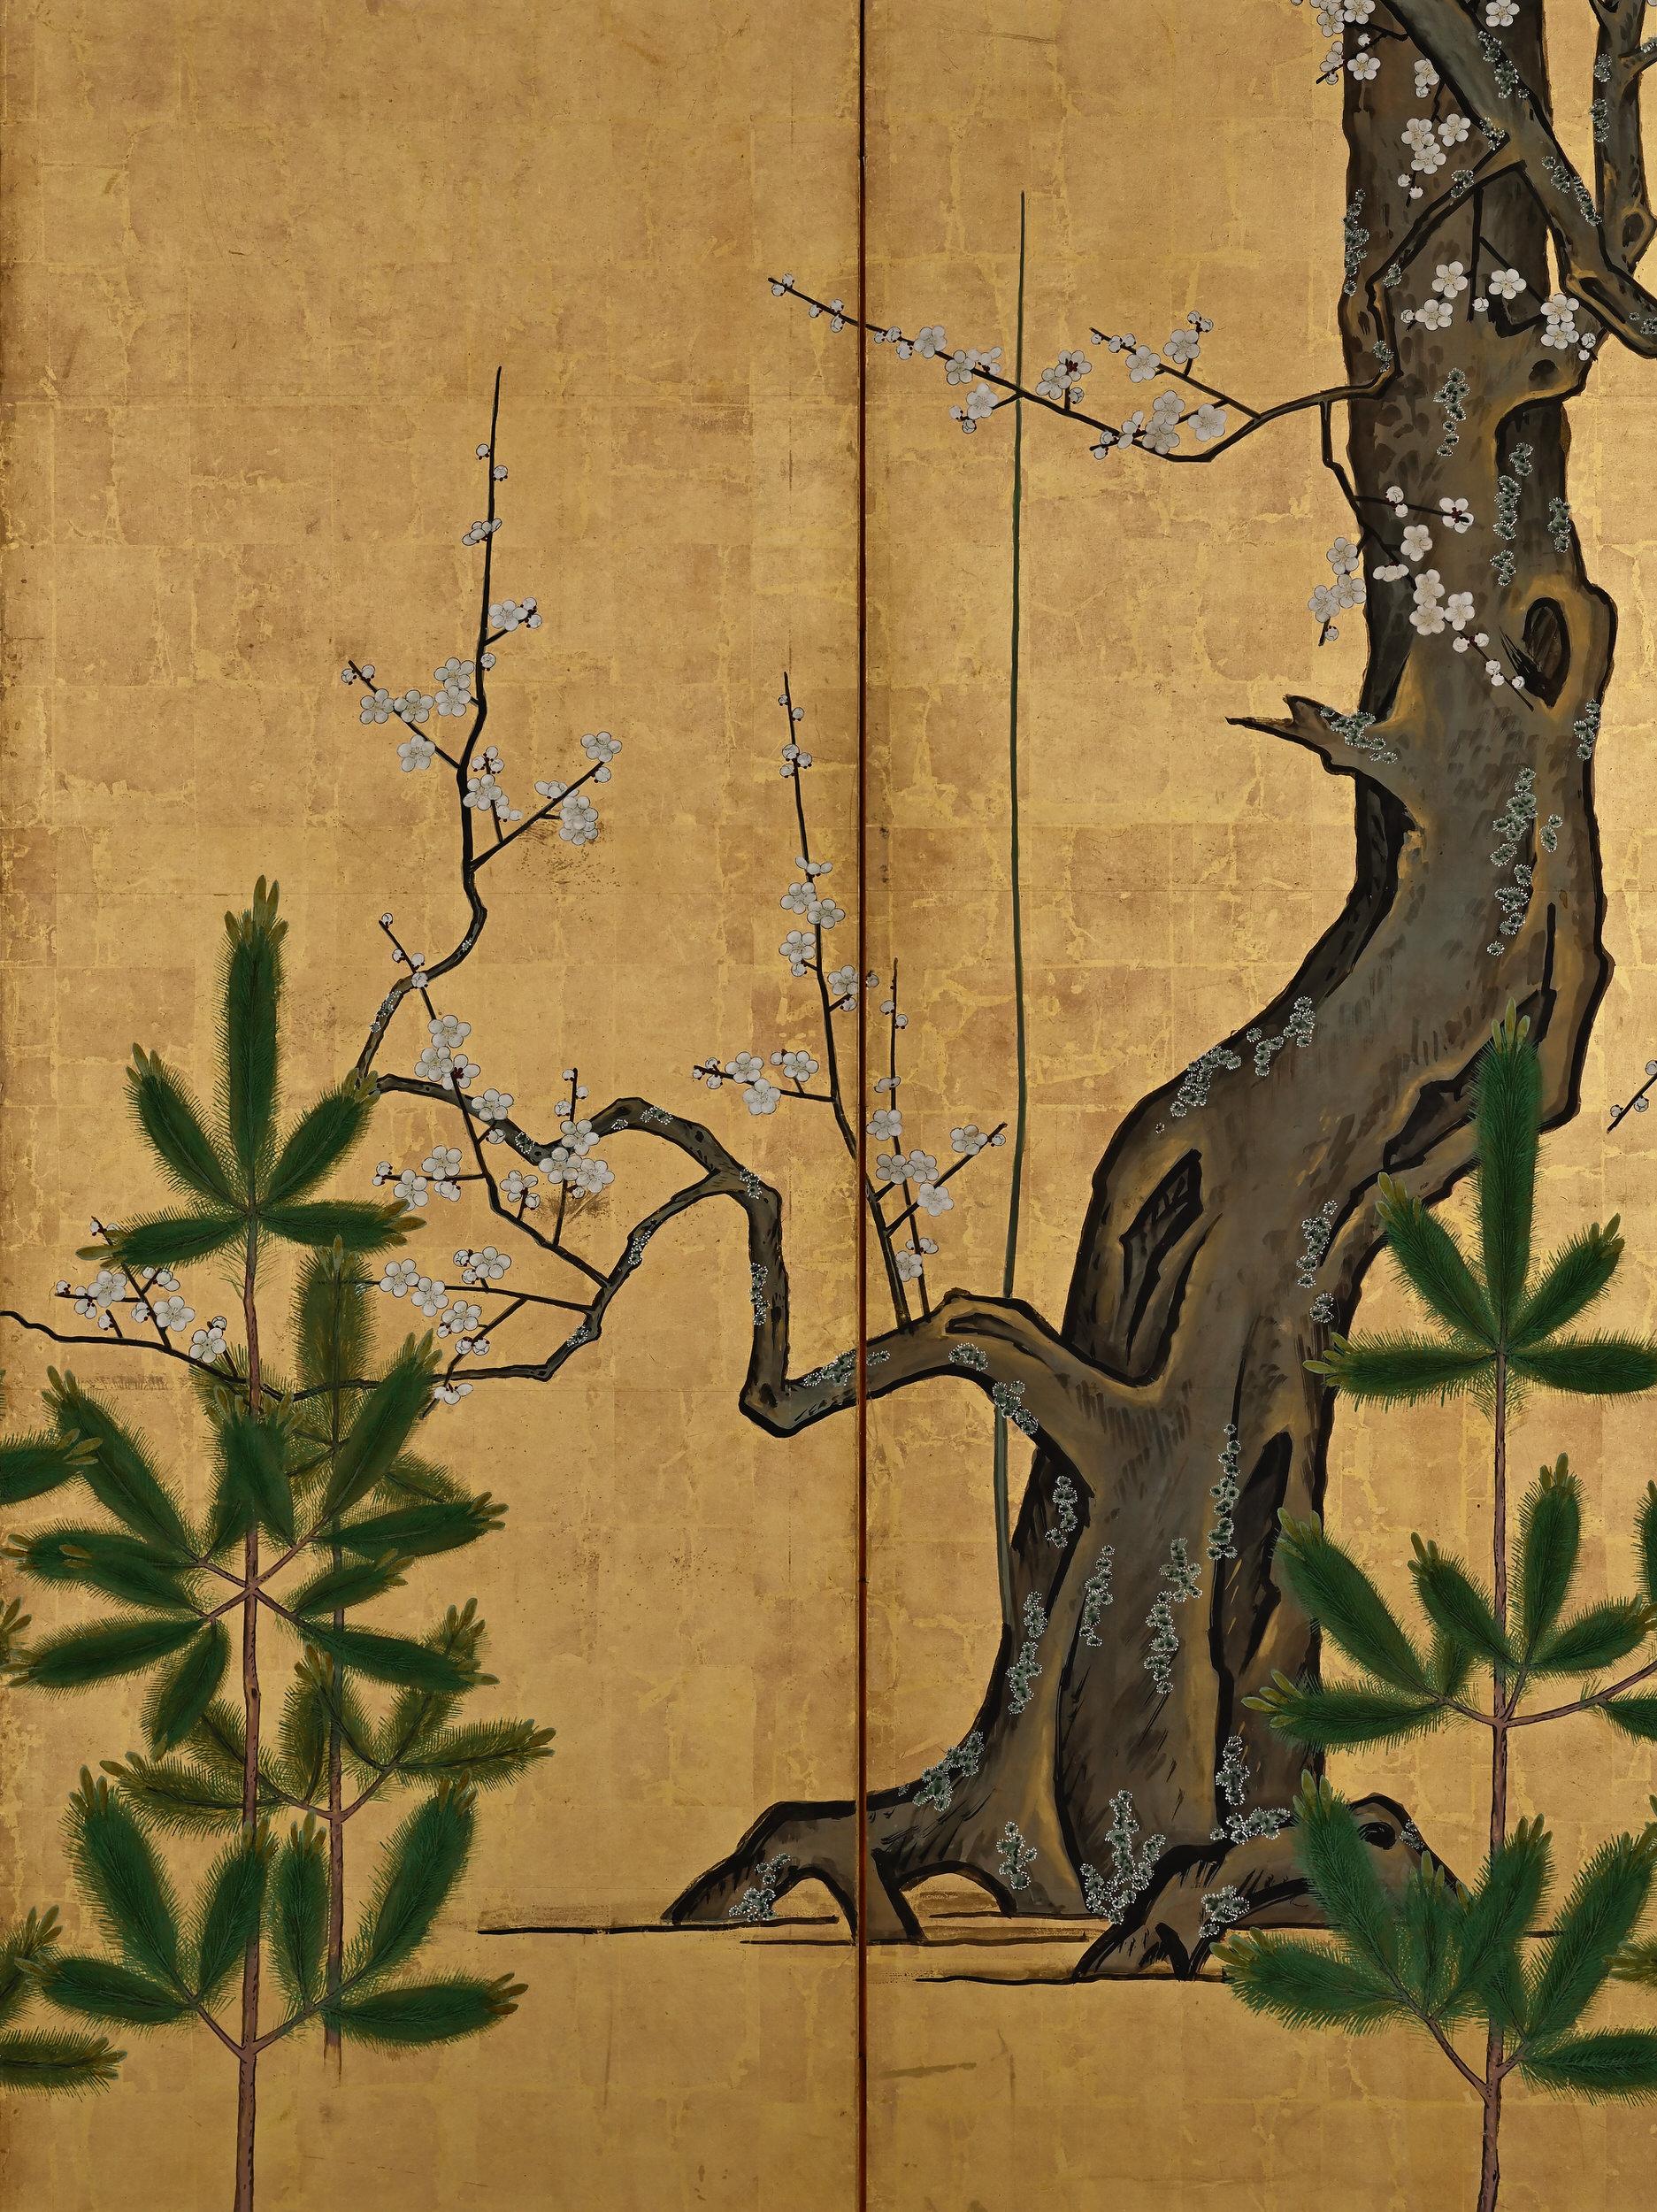 Edo 18th Century Japanese Screen Pair. Plum & Young Pines. Kano School. For Sale